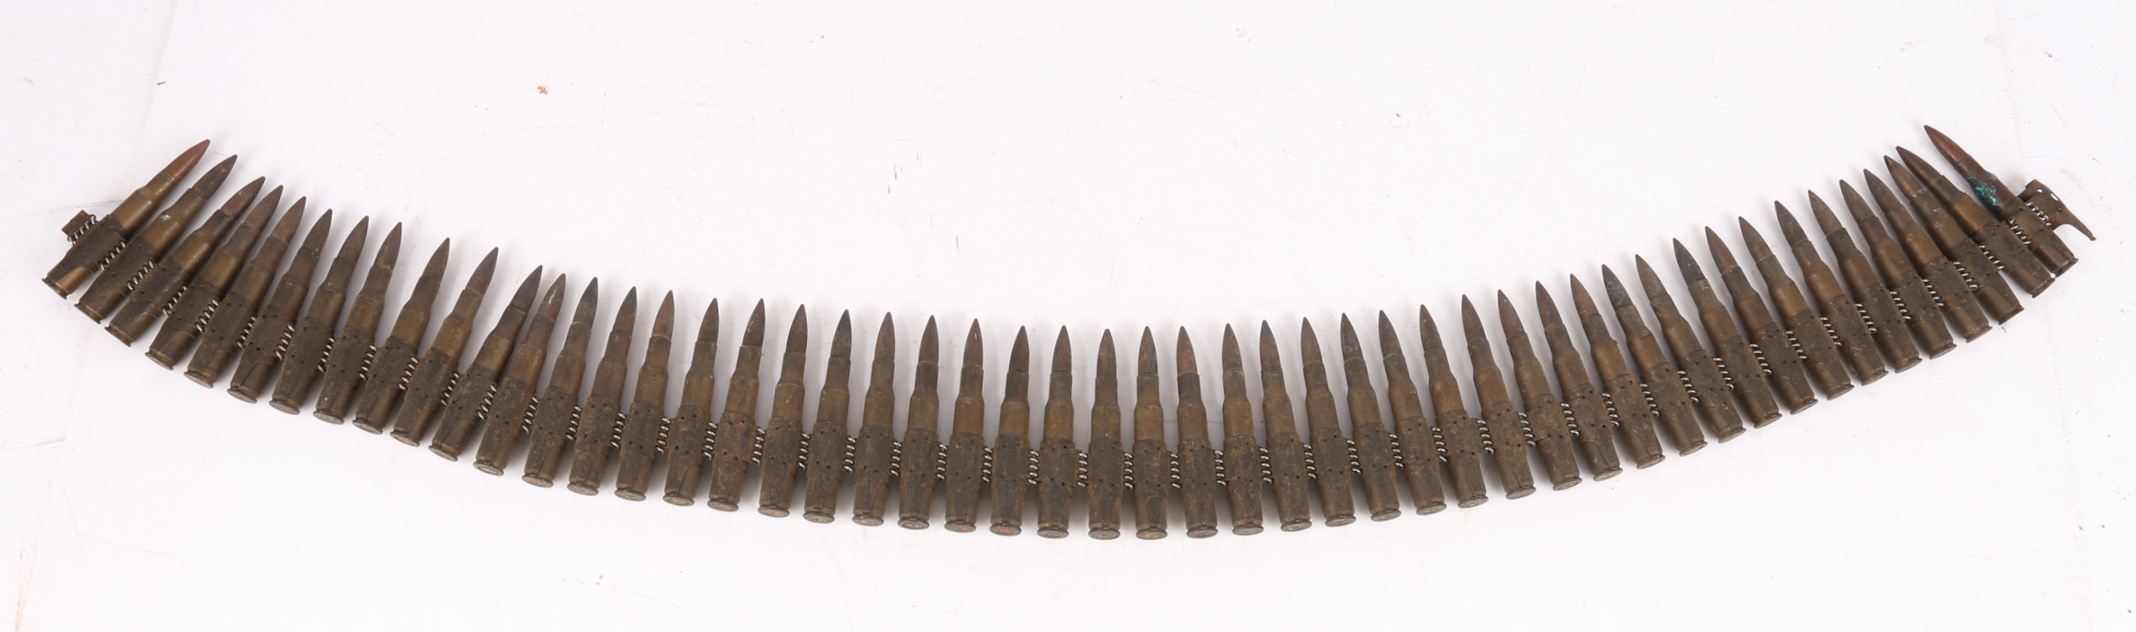 Belt of Second World War .30-03 Link Ammunition, cartridge cases and projectiles, bases stamped with - Image 2 of 2